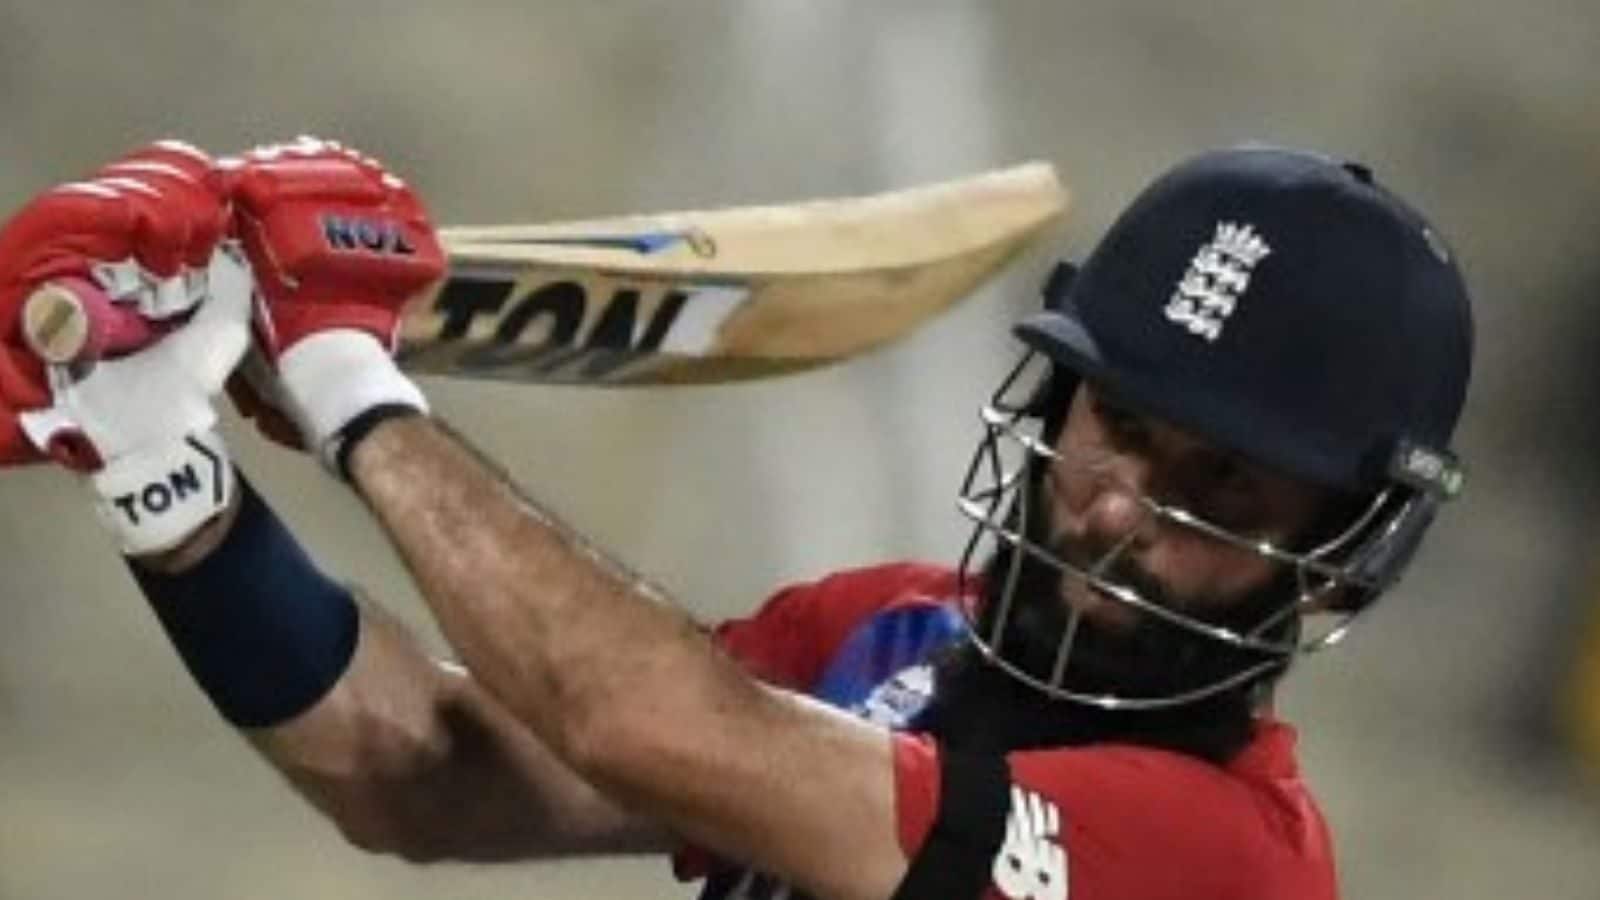 Bangladesh Premier League: Moeen Ali Set to Play for Comilla Victorians